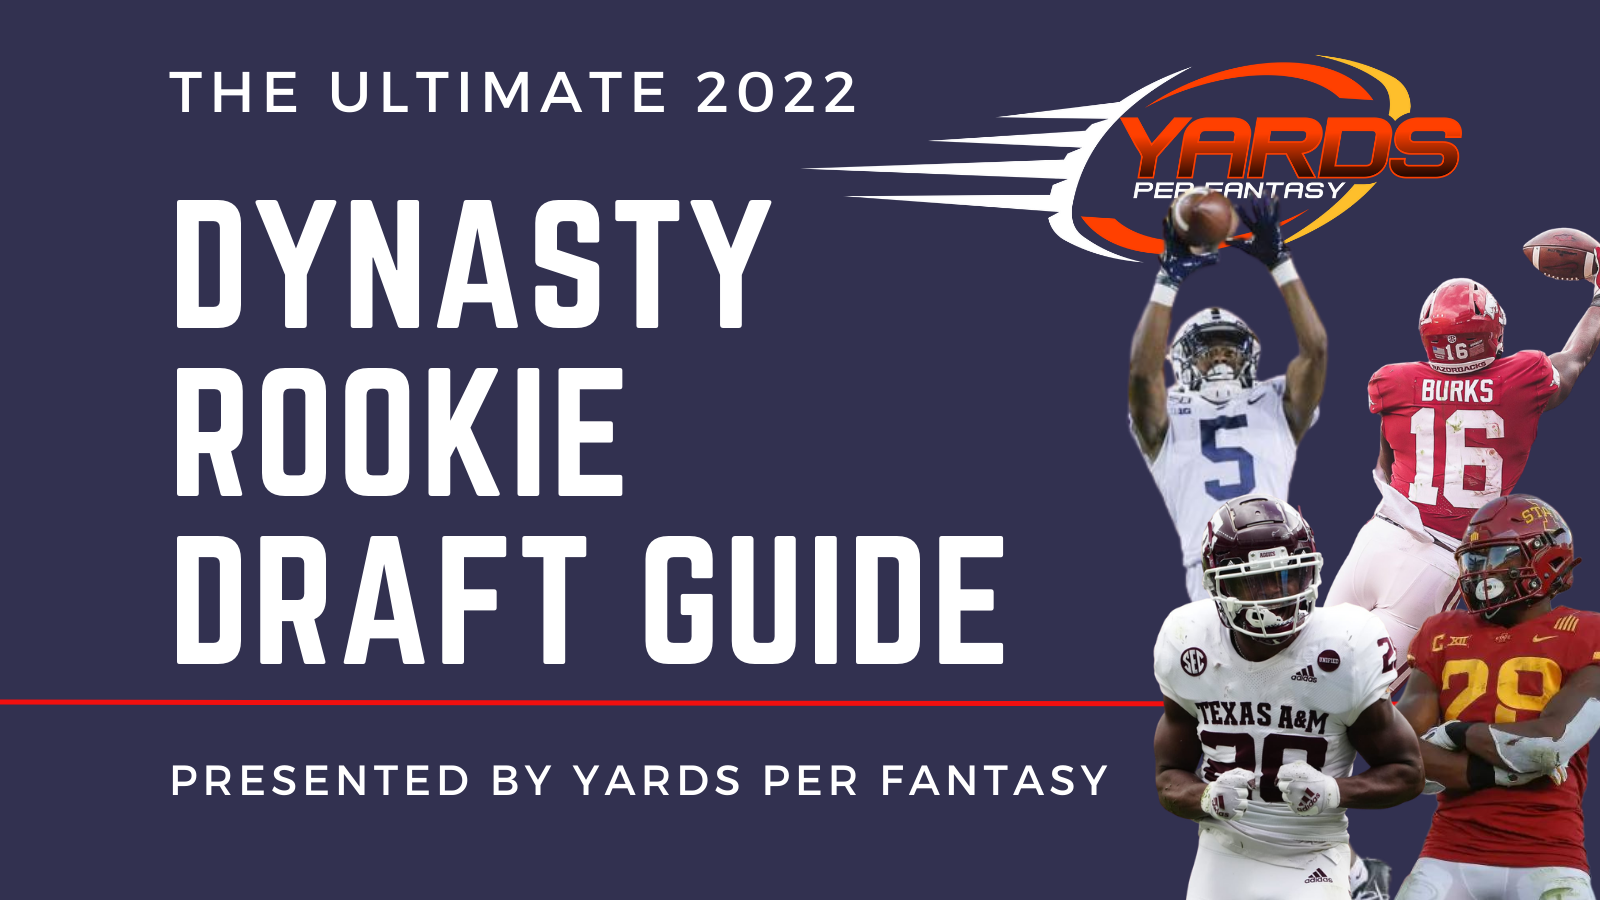 The Ultimate 2022 Dynasty Rookie Draft Guide - Yards Per Fantasy